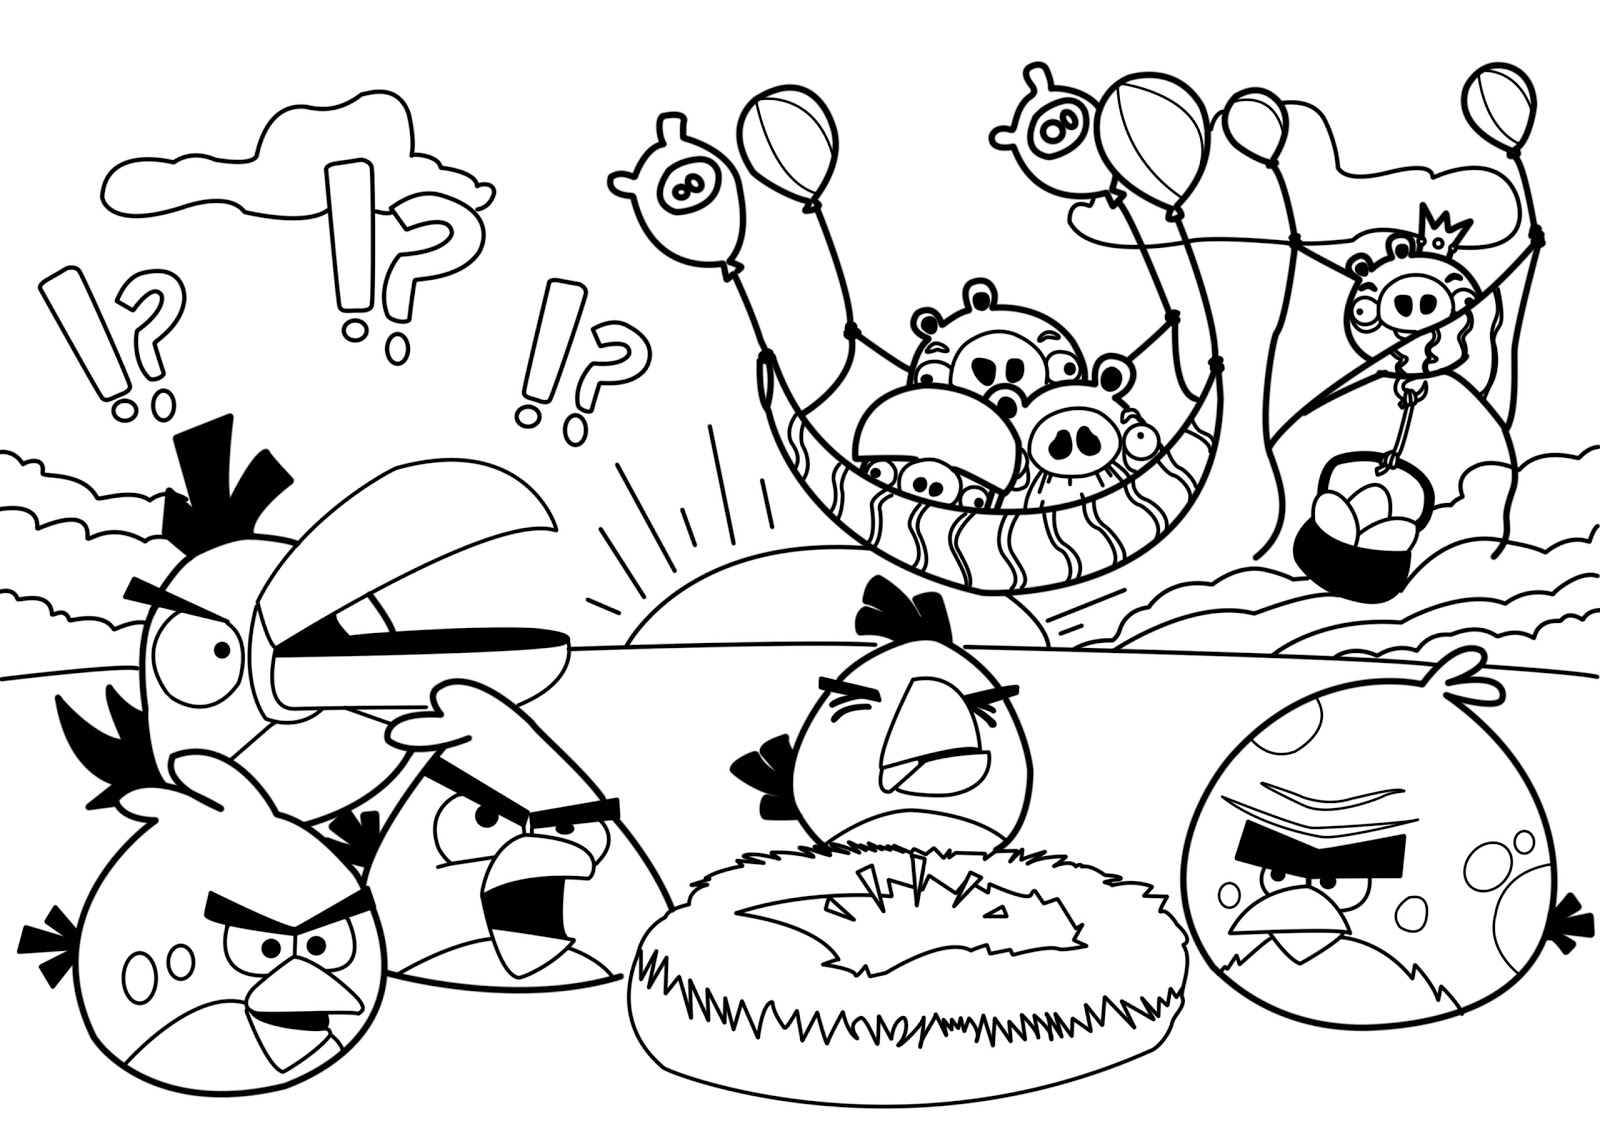 Download New Angry Birds Coloring Pages | All Free Coloring Page For Kids